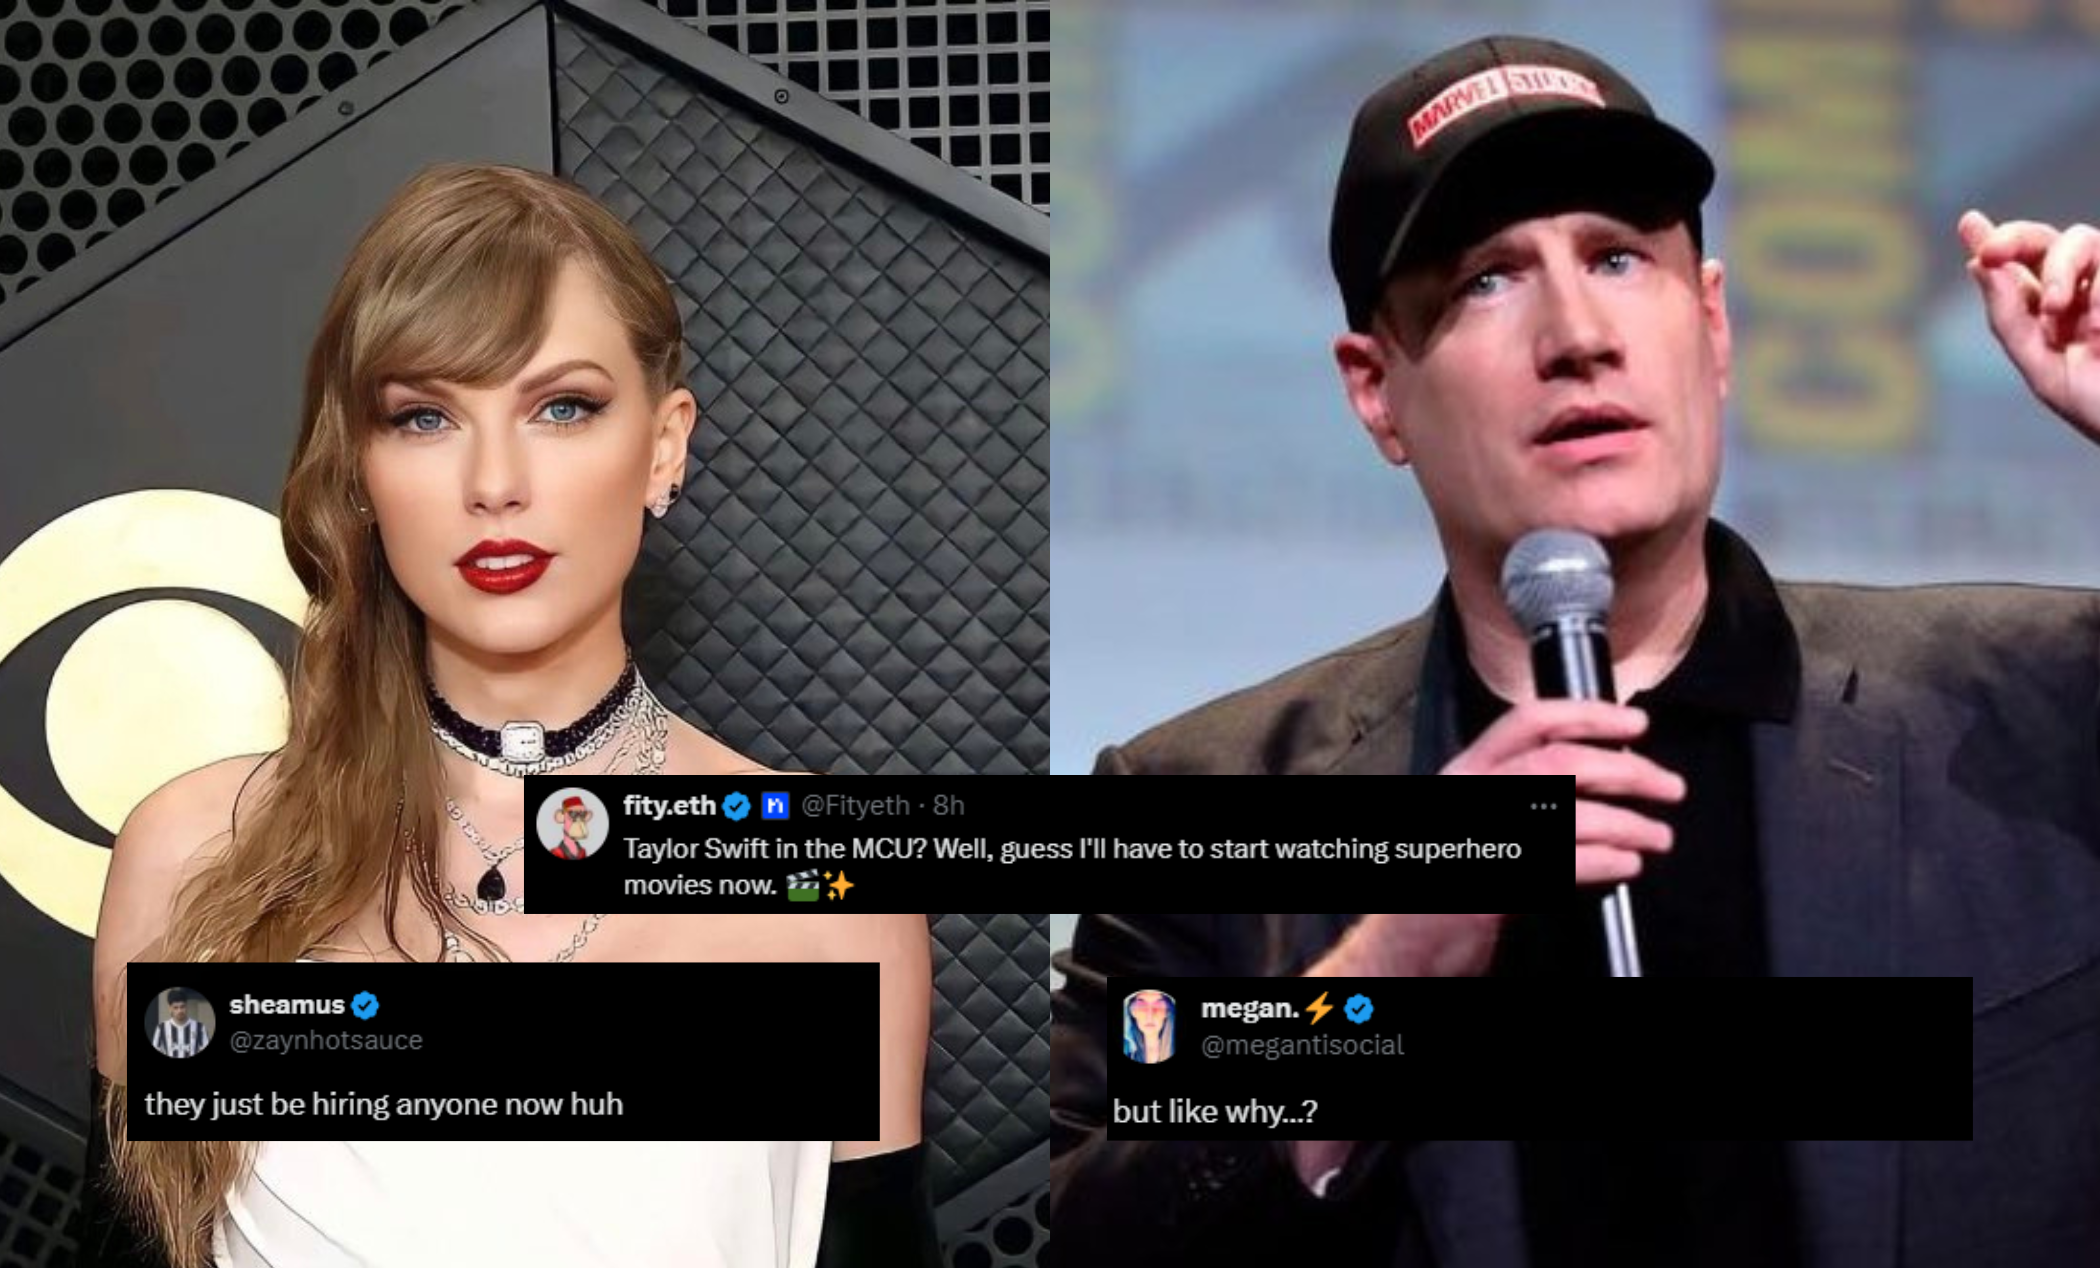 Will Taylor Swift join Marvel? Fans in frenzy over reported meeting with Kevin Feige